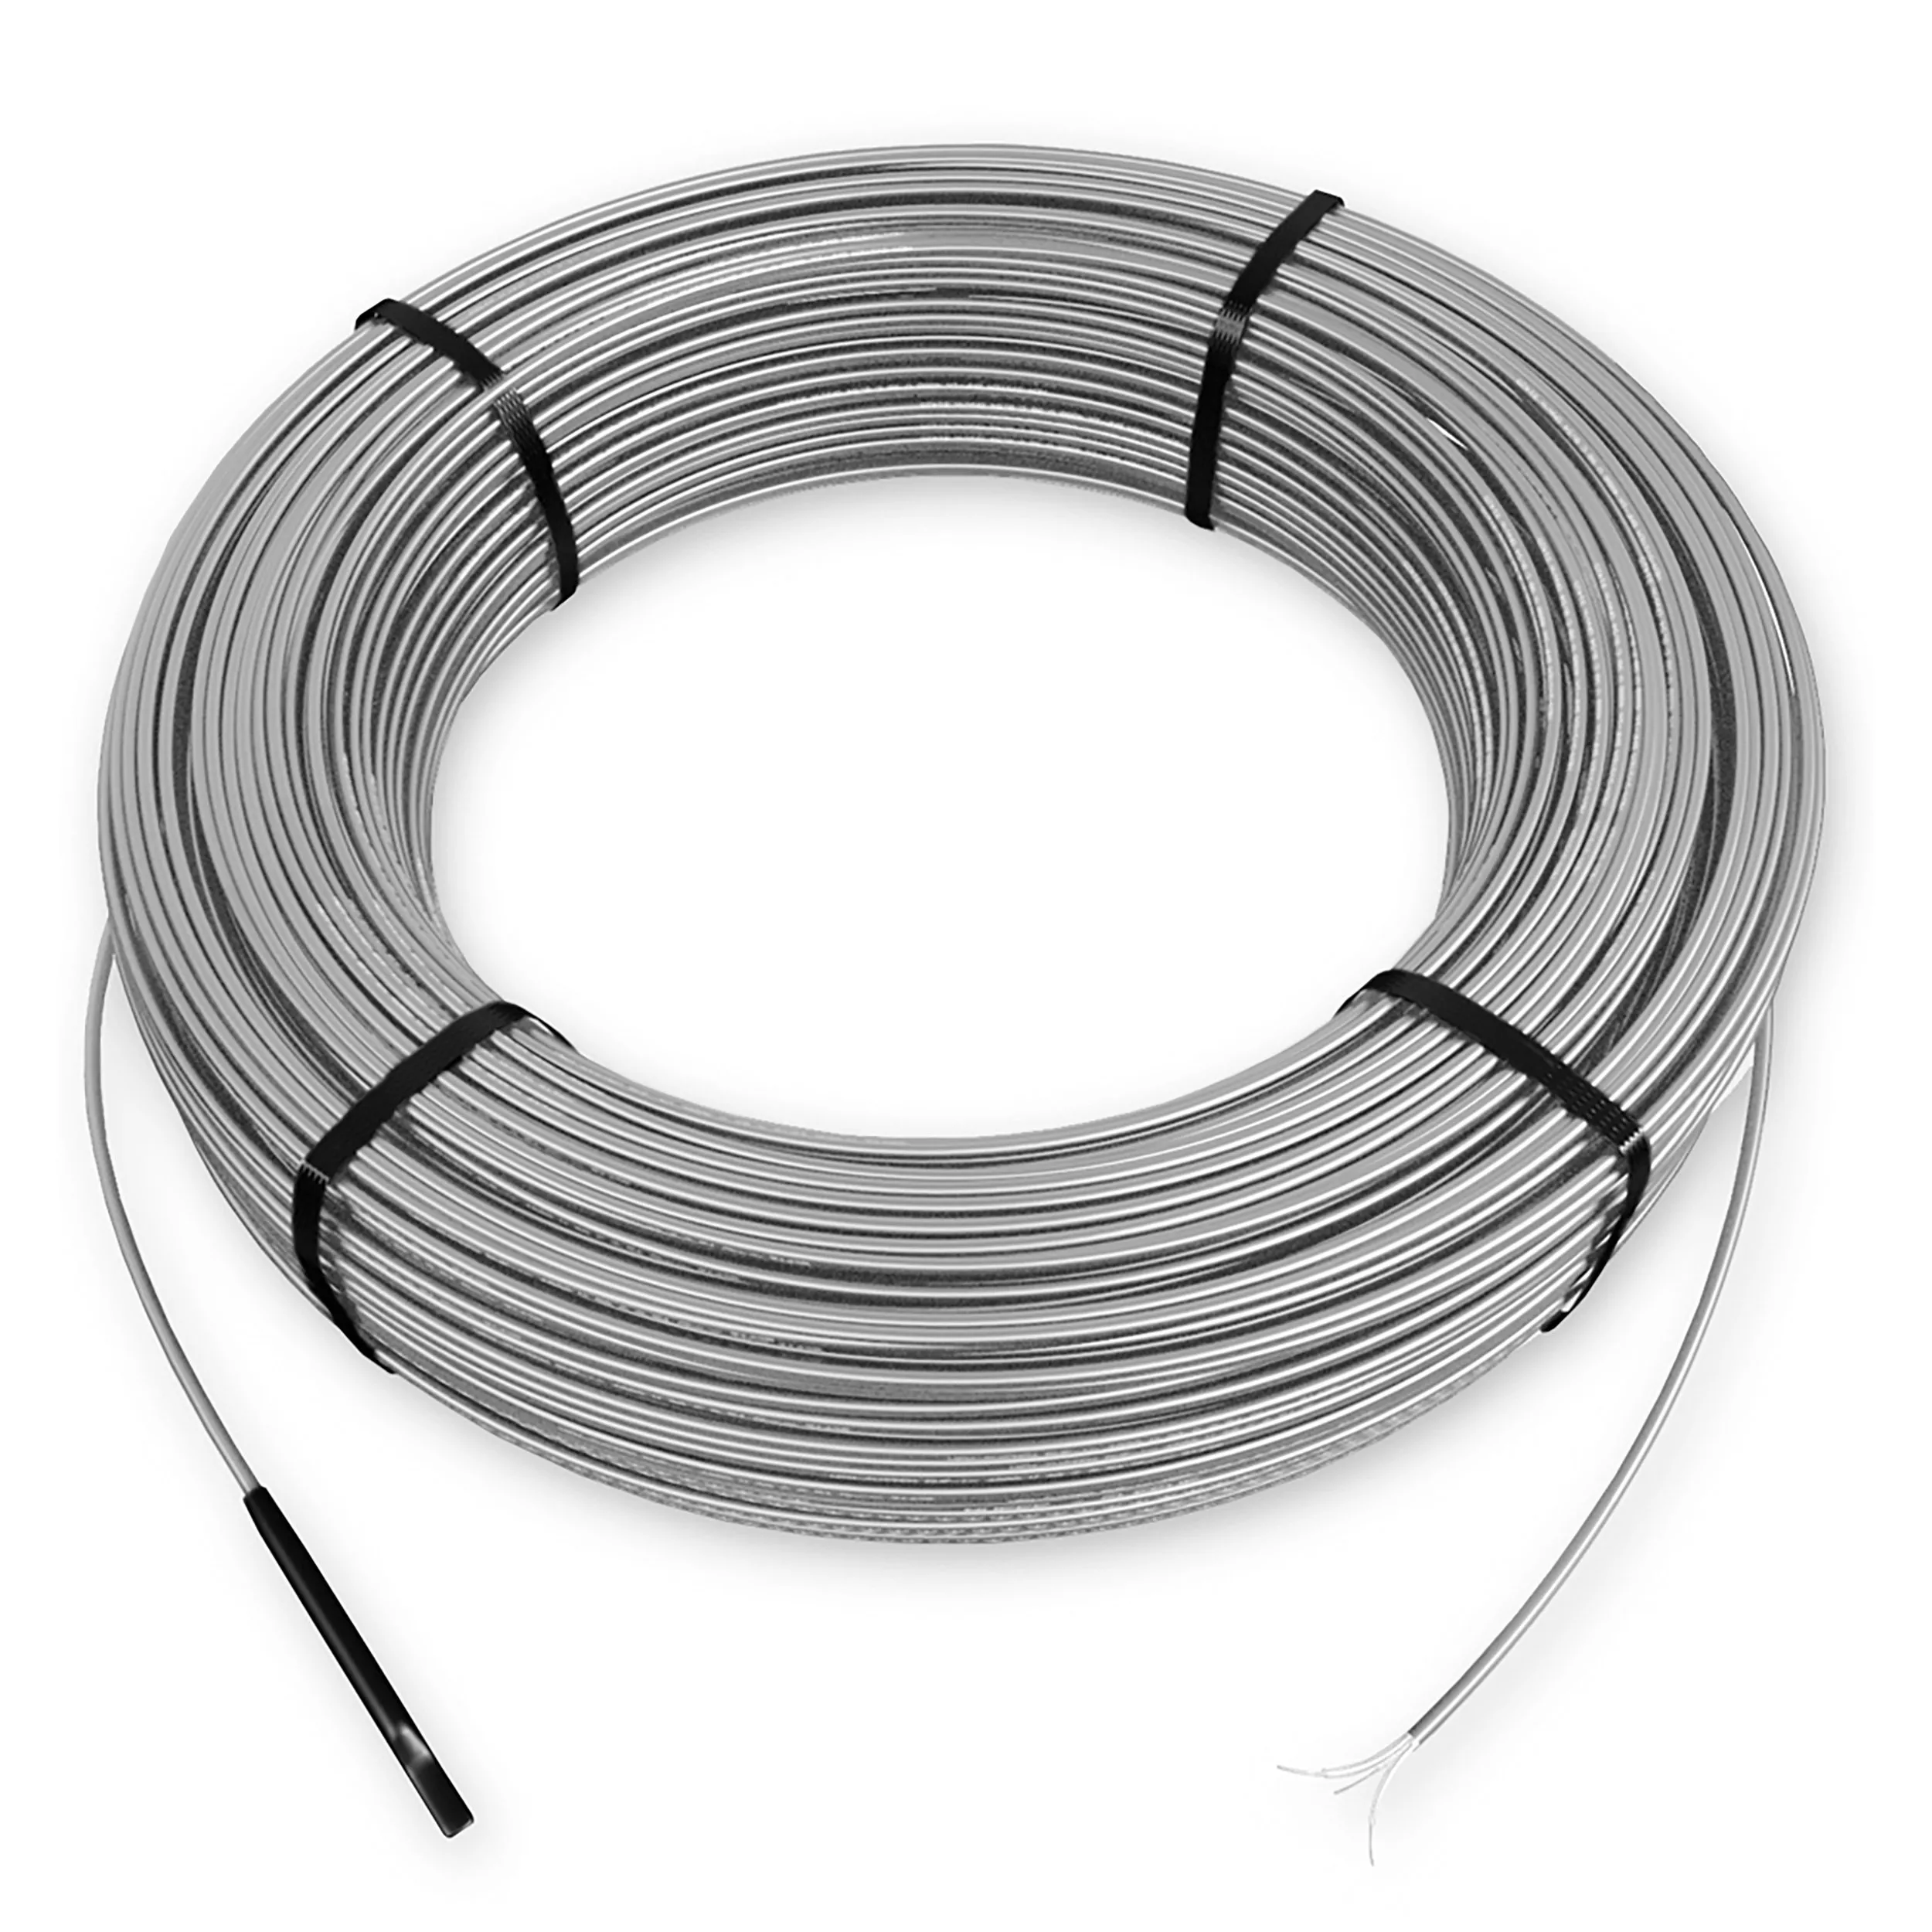 Schluter 225.2sqft. Ditra Heat 240V Heating Cable